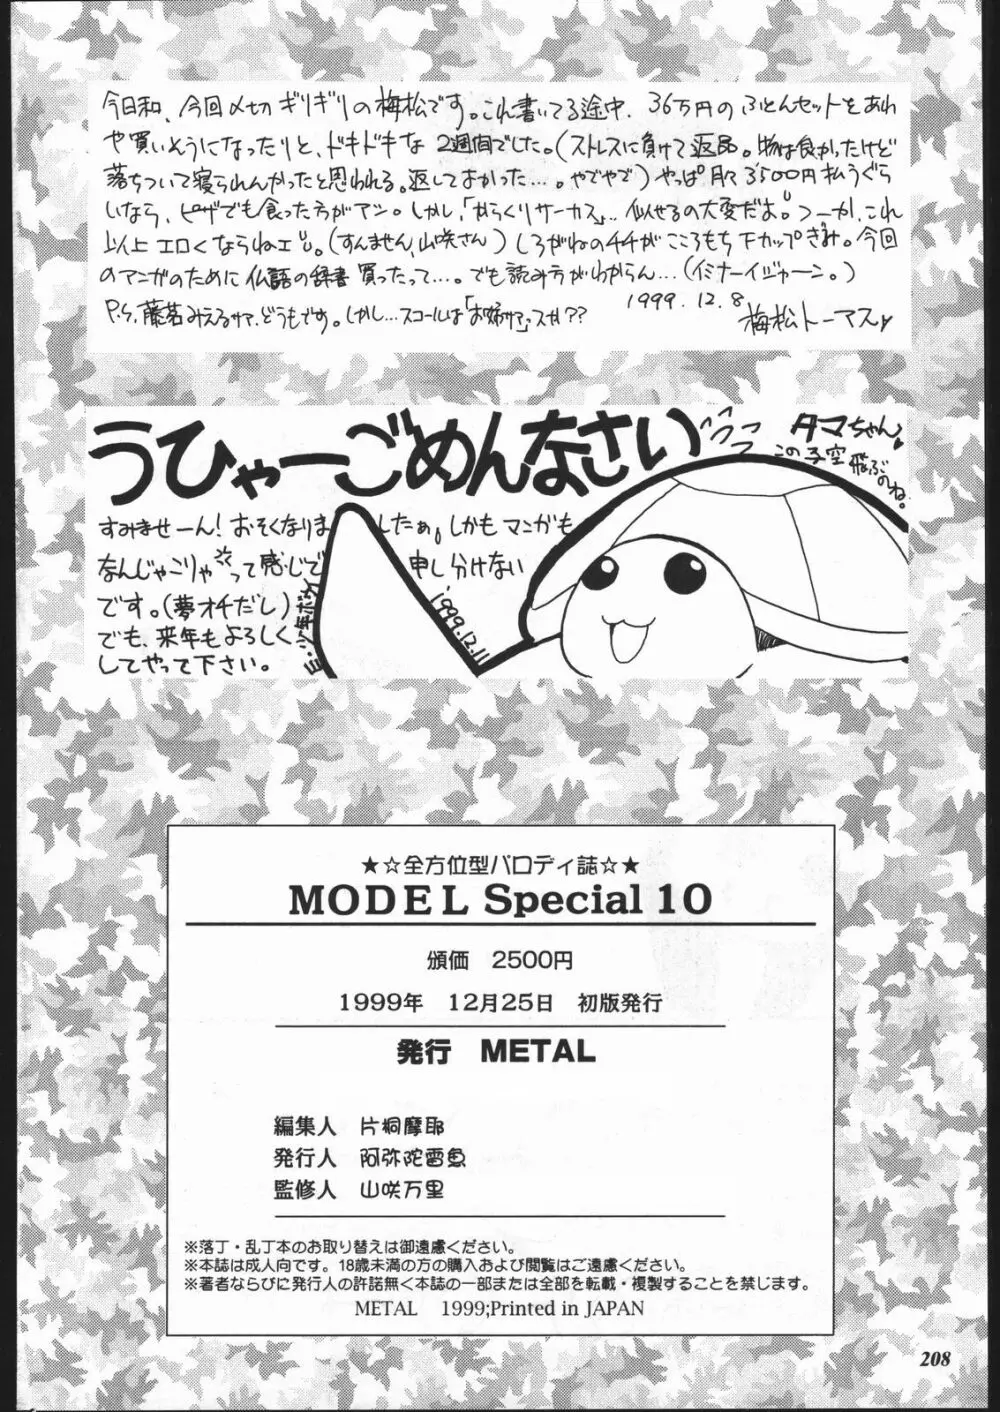 MODEL SPECIAL 10 Page.206